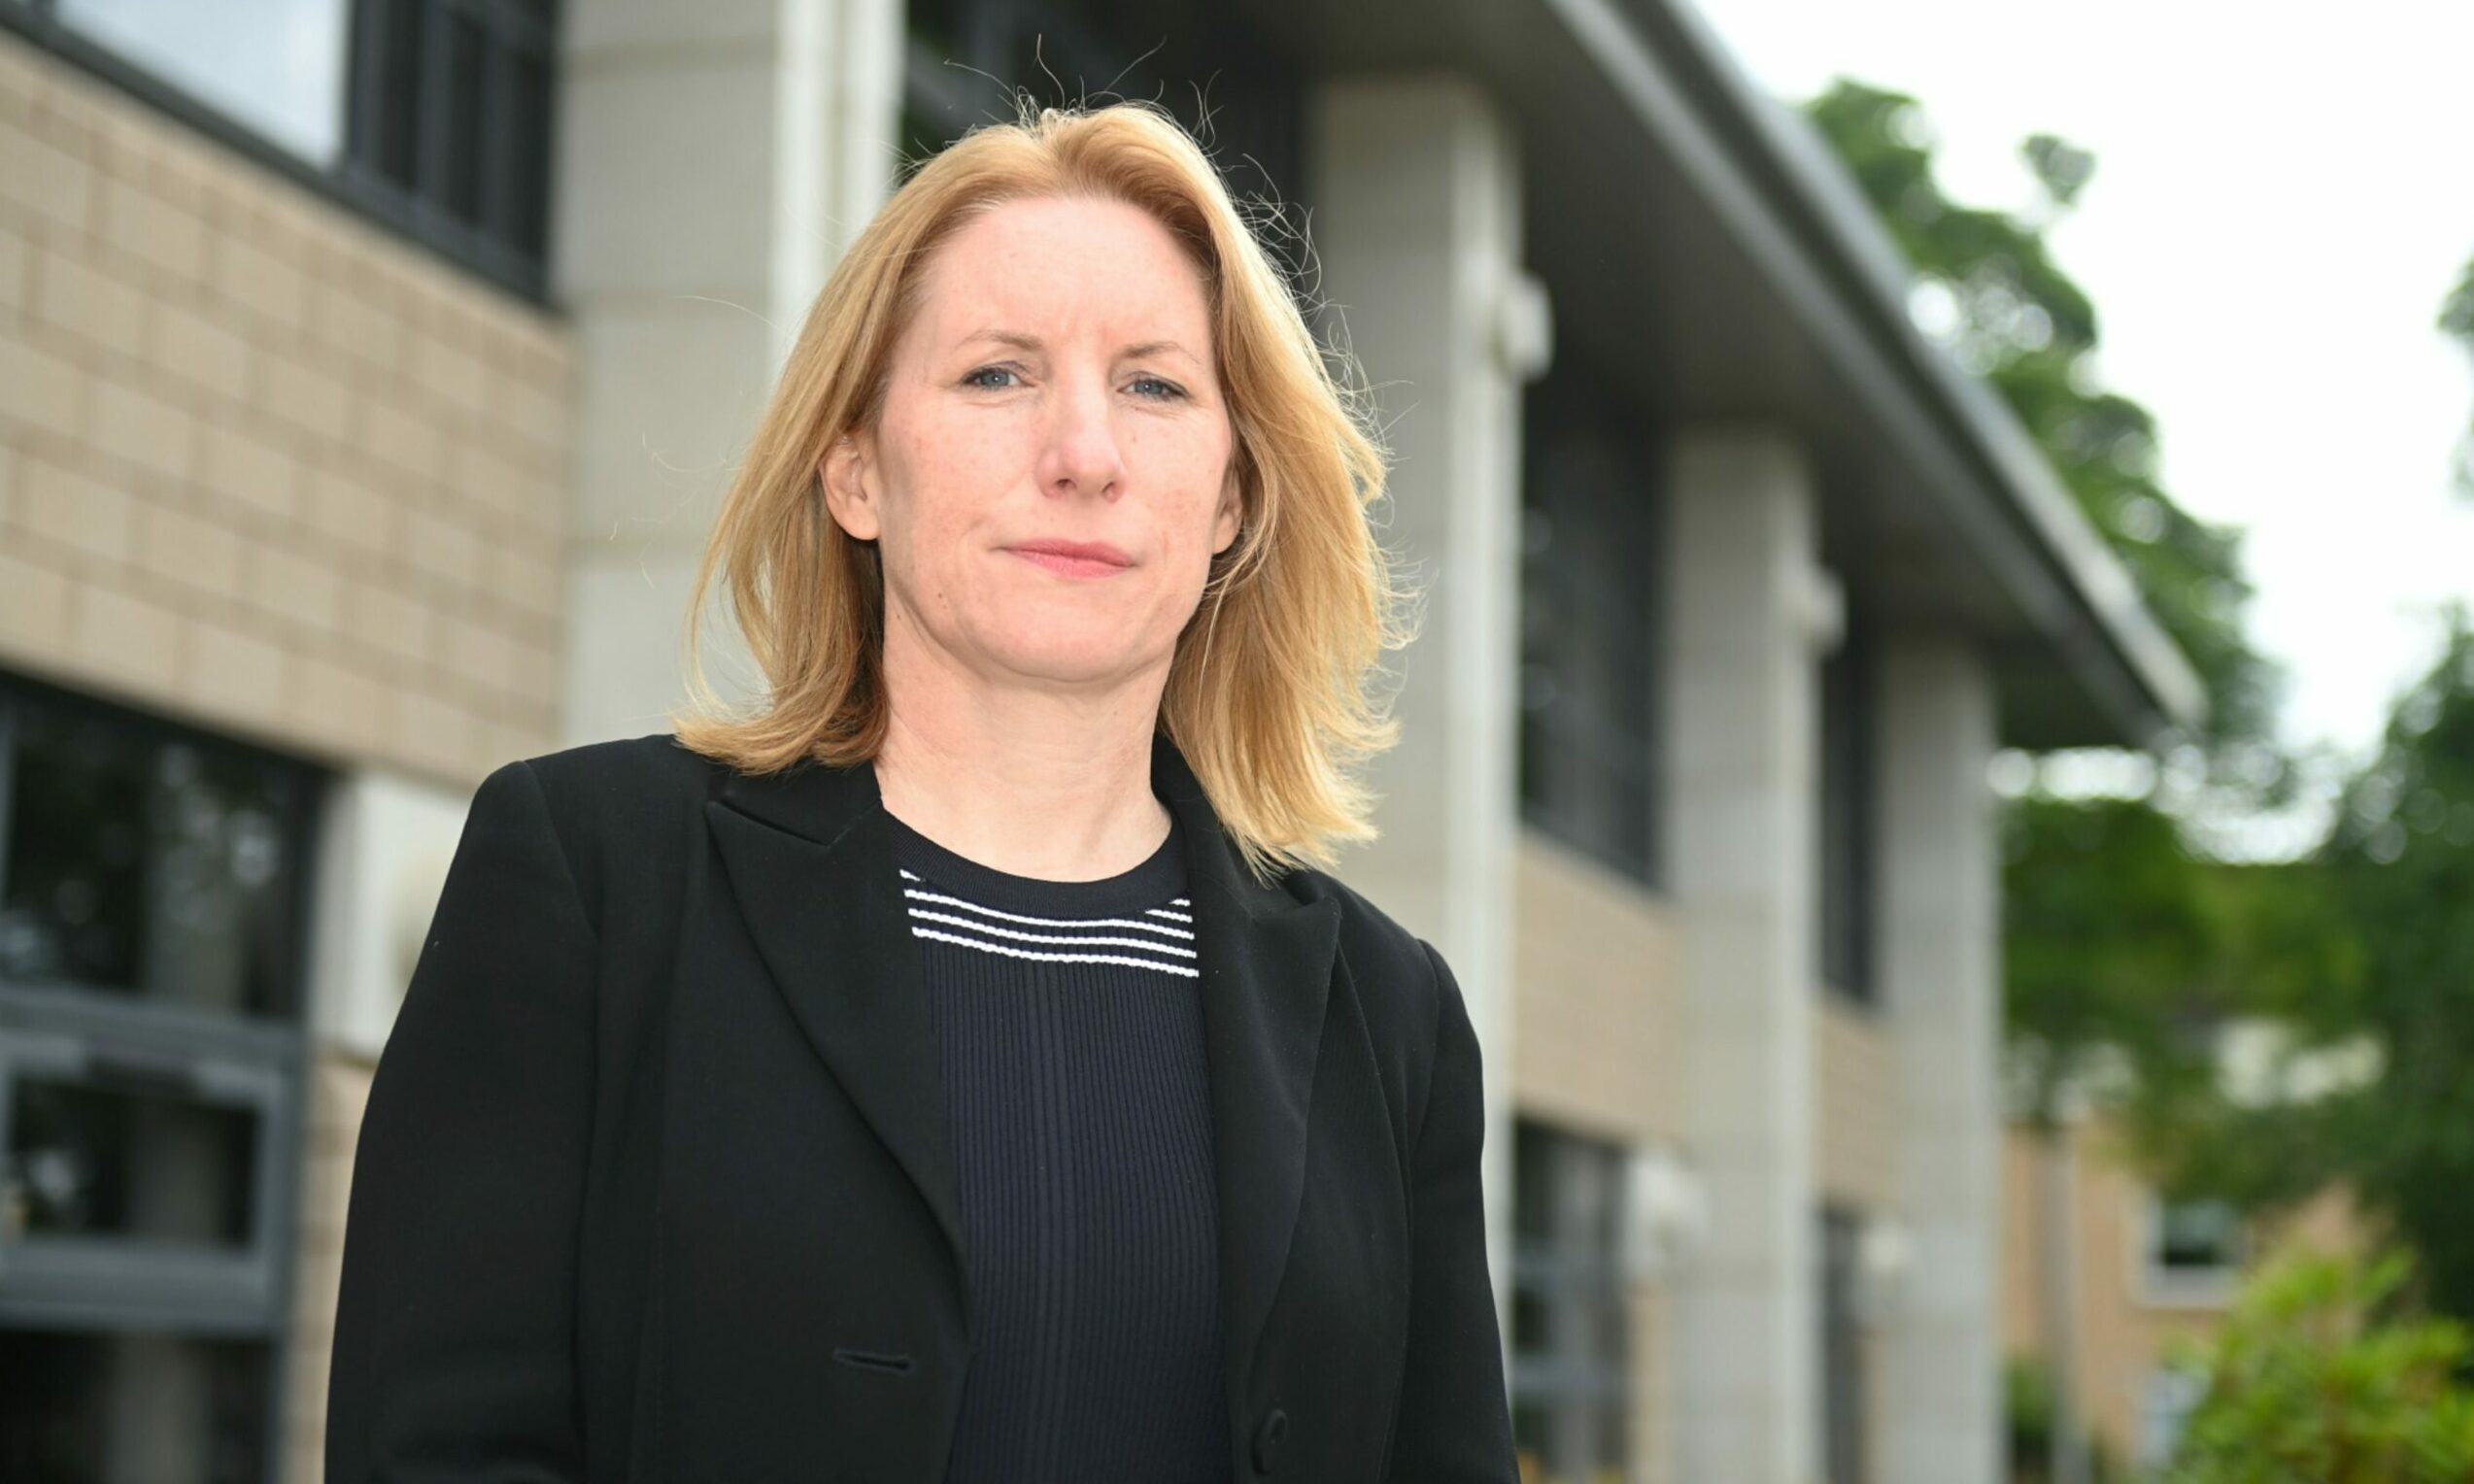 Caroline Hiscox has spoken about the pressures NHS Grampian is currently under. Image: Paul Glendell/ DC Thomson